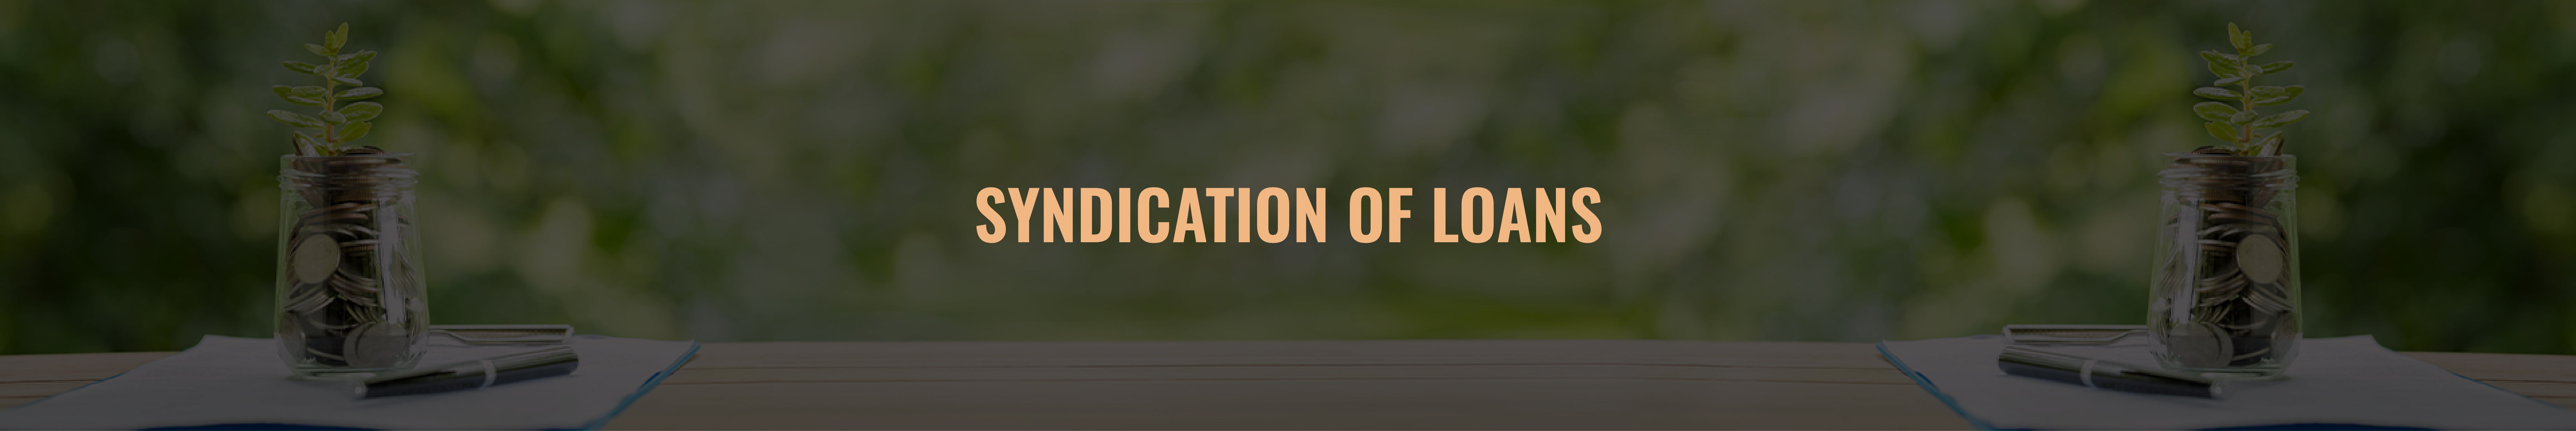 Syndication of Loans